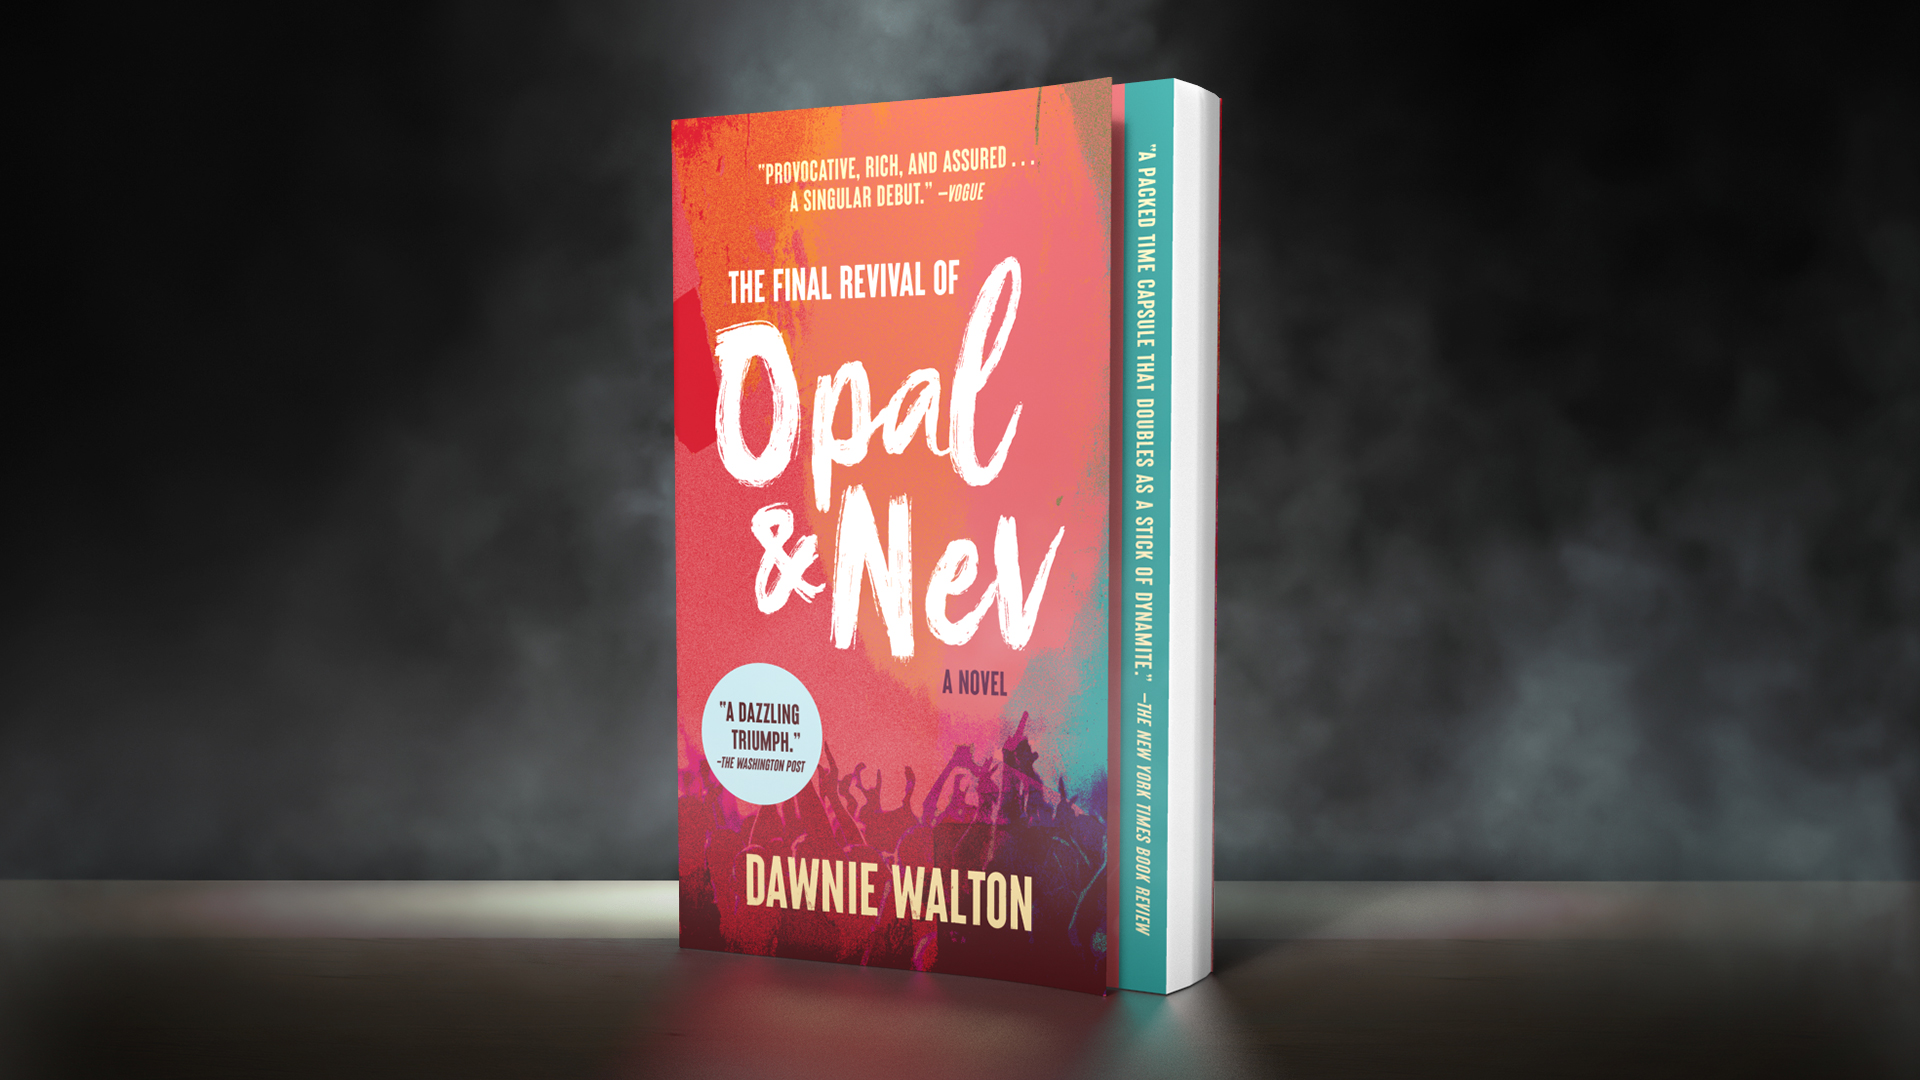 Cover of "The Final Revival of Opal & Nev" by Dawnie Walton